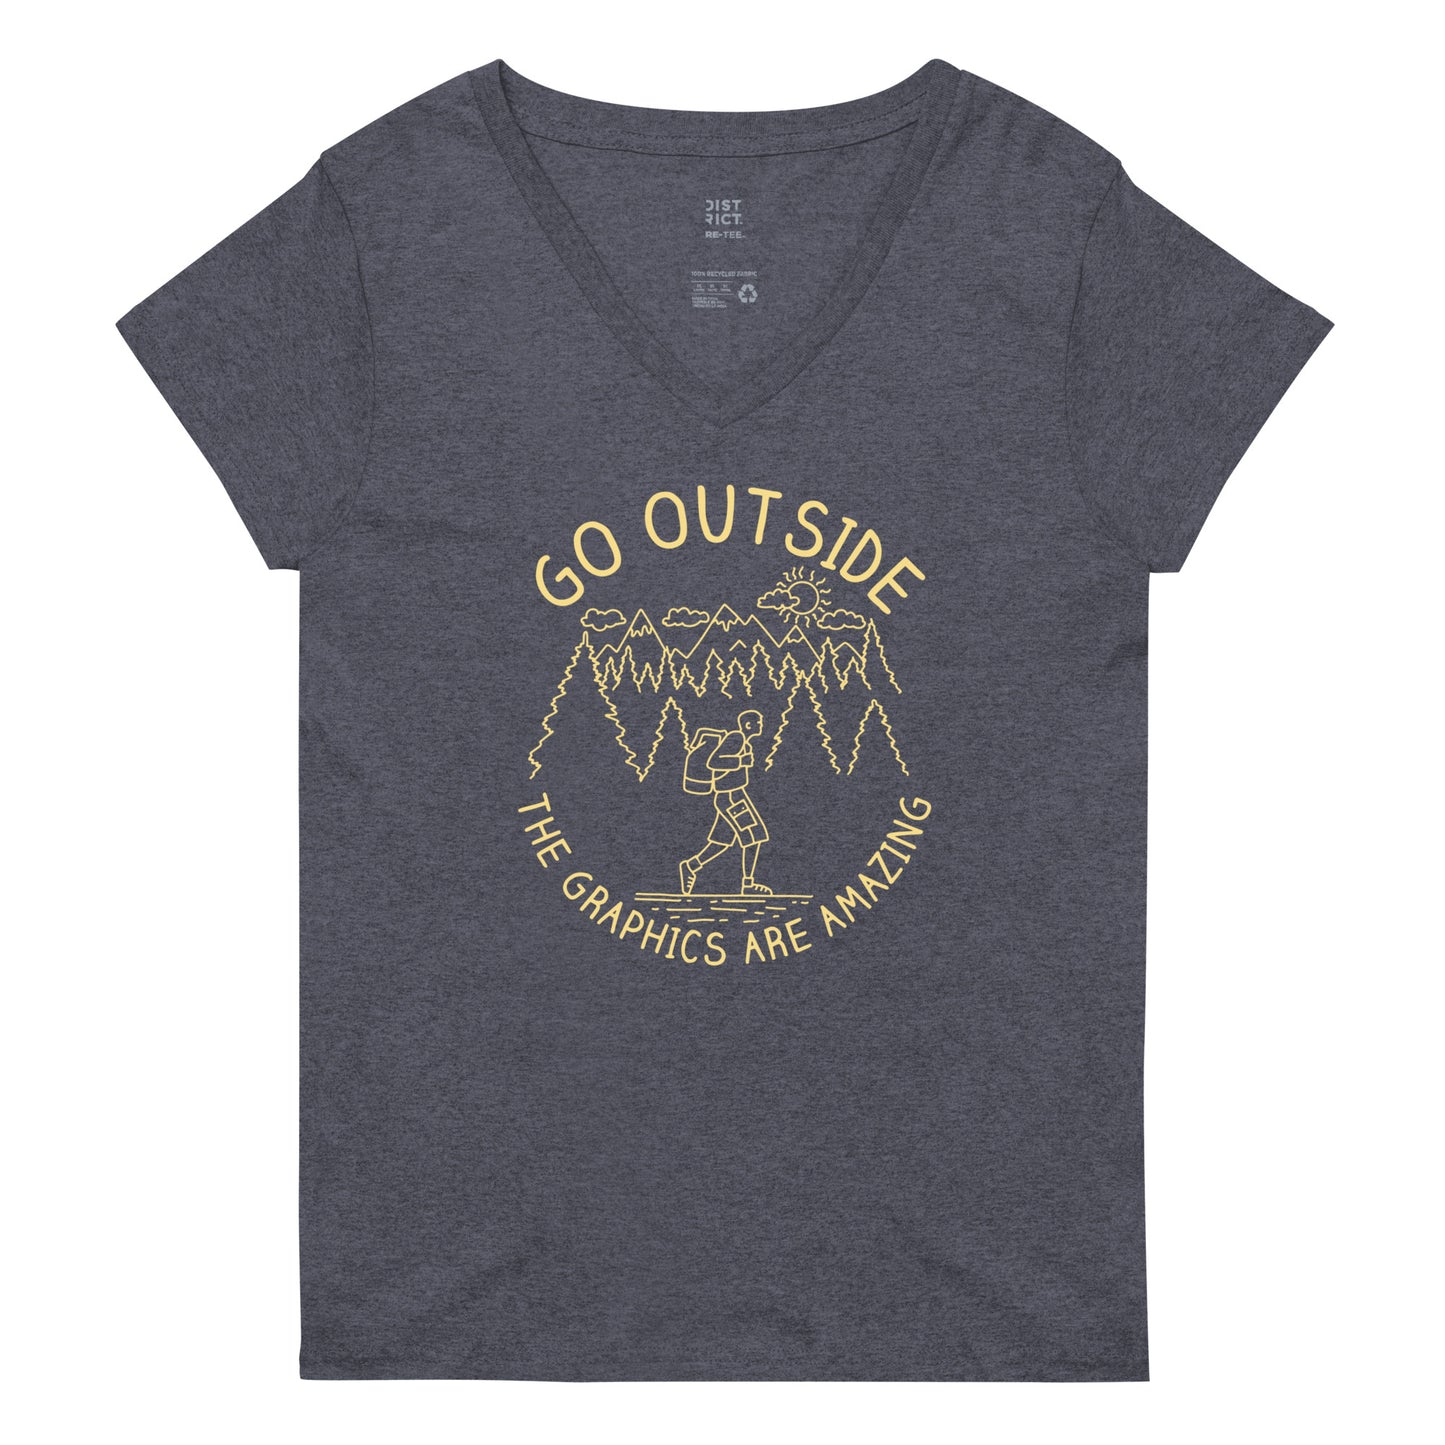 Go Outside The Graphics Are Amazing Women's V-Neck Tee